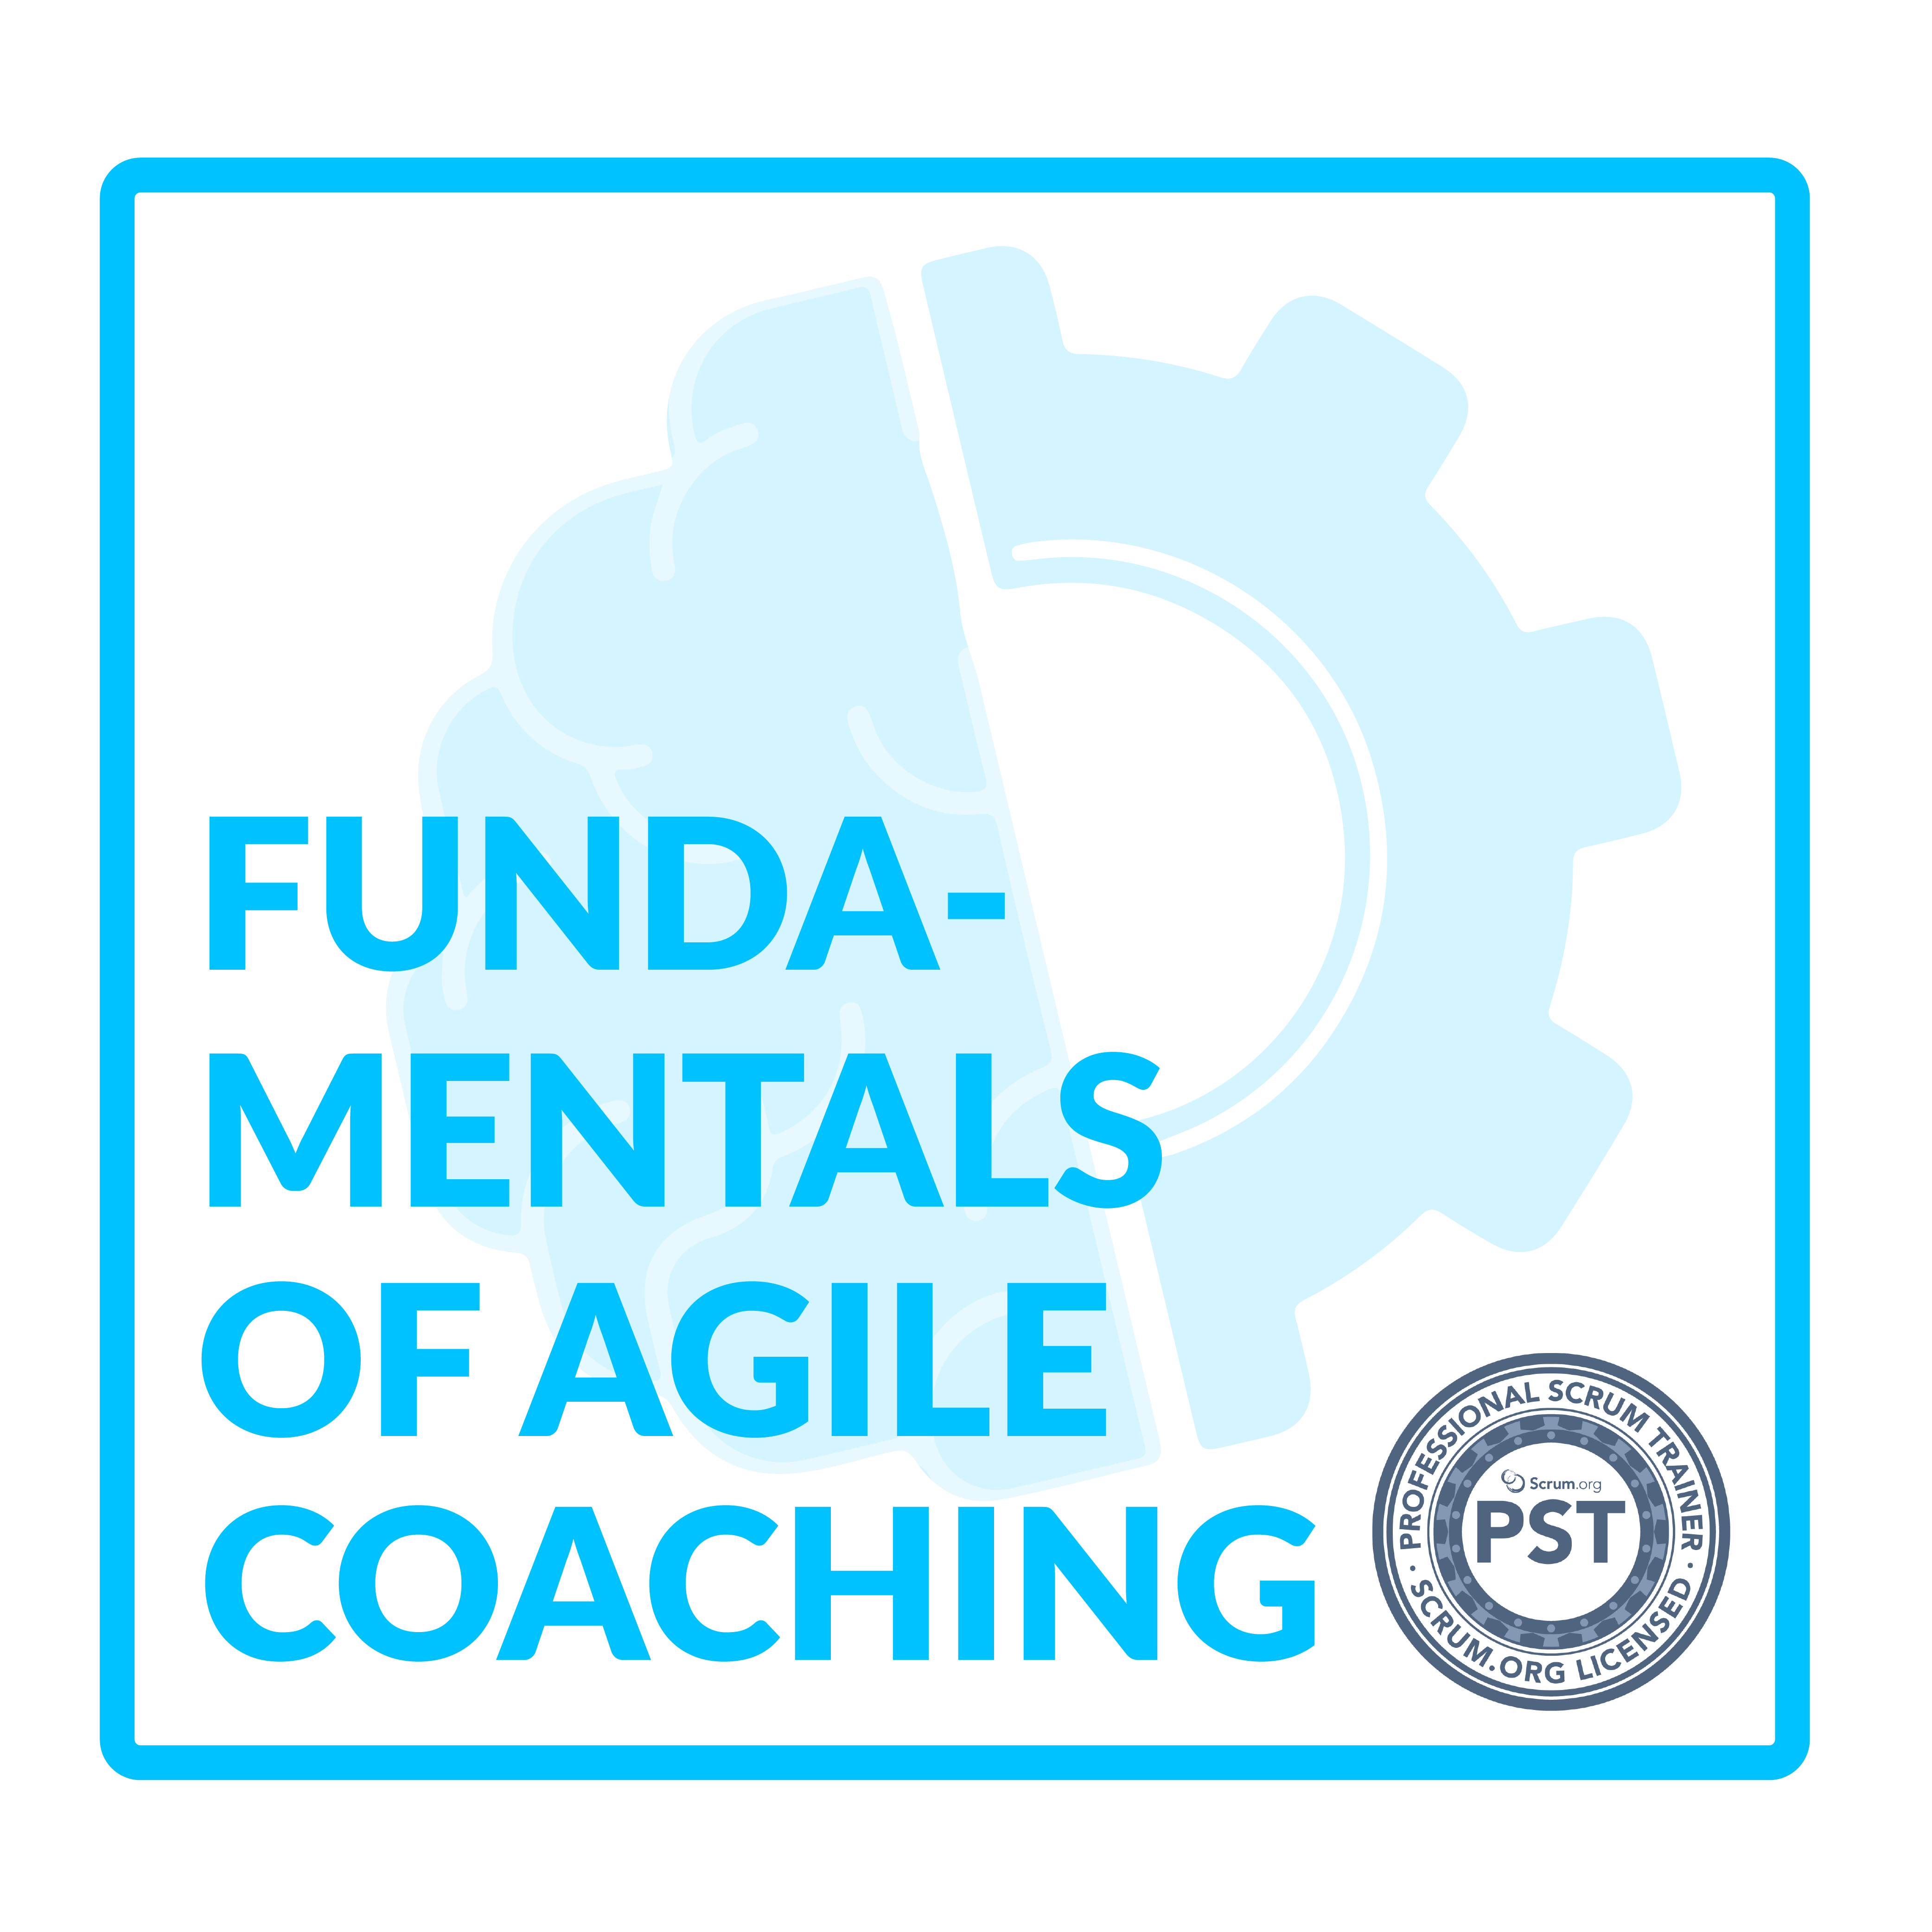 Fundamentals of Agile Coaching Online Course